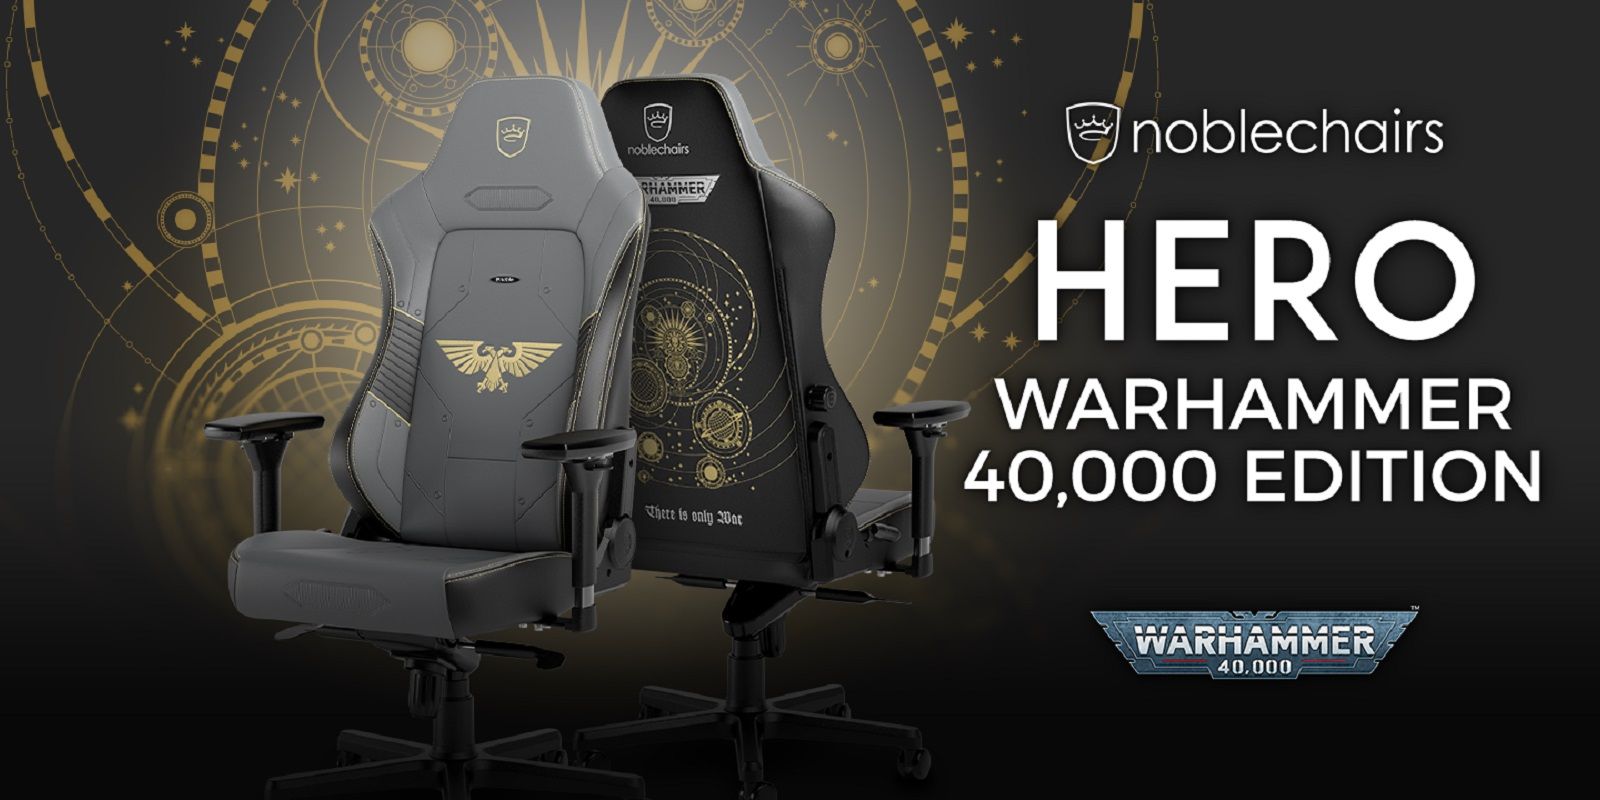 noblechairs HERO Warhammer 40,000 Edition Gaming Chair Launched